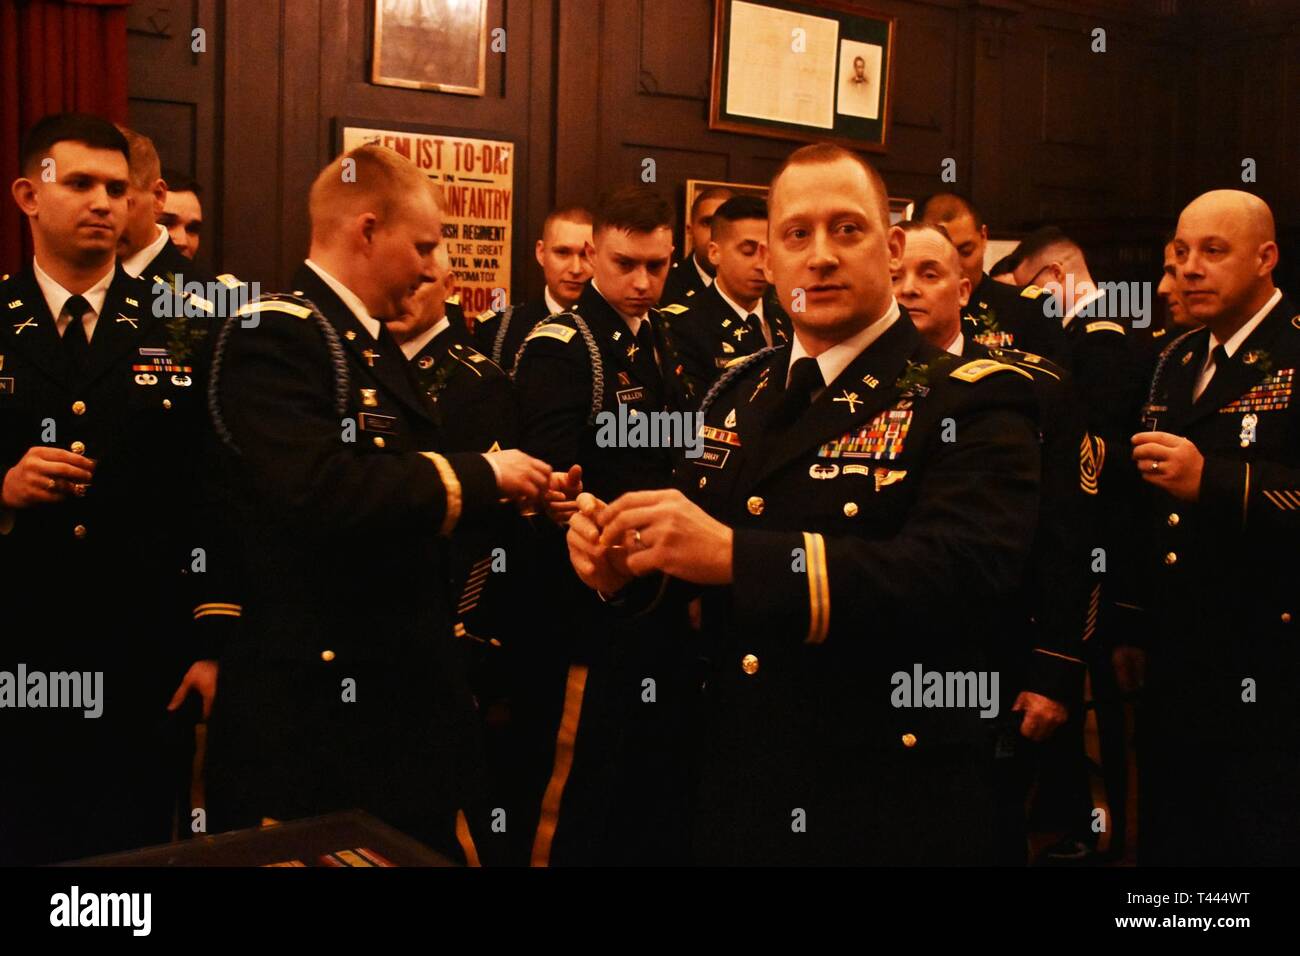 New York Army National Guard  Lt. Col. Don MaKay, 69th Infantry Regiment, prepares to offer the traditional Irish Whiskey toast  at the Lexington Armory, Manhattan, N.Y., March 16, 2019, as the 1st Battalion, 69th Infantry prepared to lead the world's largest St. Patrick's Day parade. As a tradition, the commanders and senior noncommissioned officers, along with some guests of the 69th infantry regiment, raise a toast prior to marching to Mass at St. Patrick's Cathedral, which is held for the unit before the parade.(N.Y. Army National Guard Stock Photo